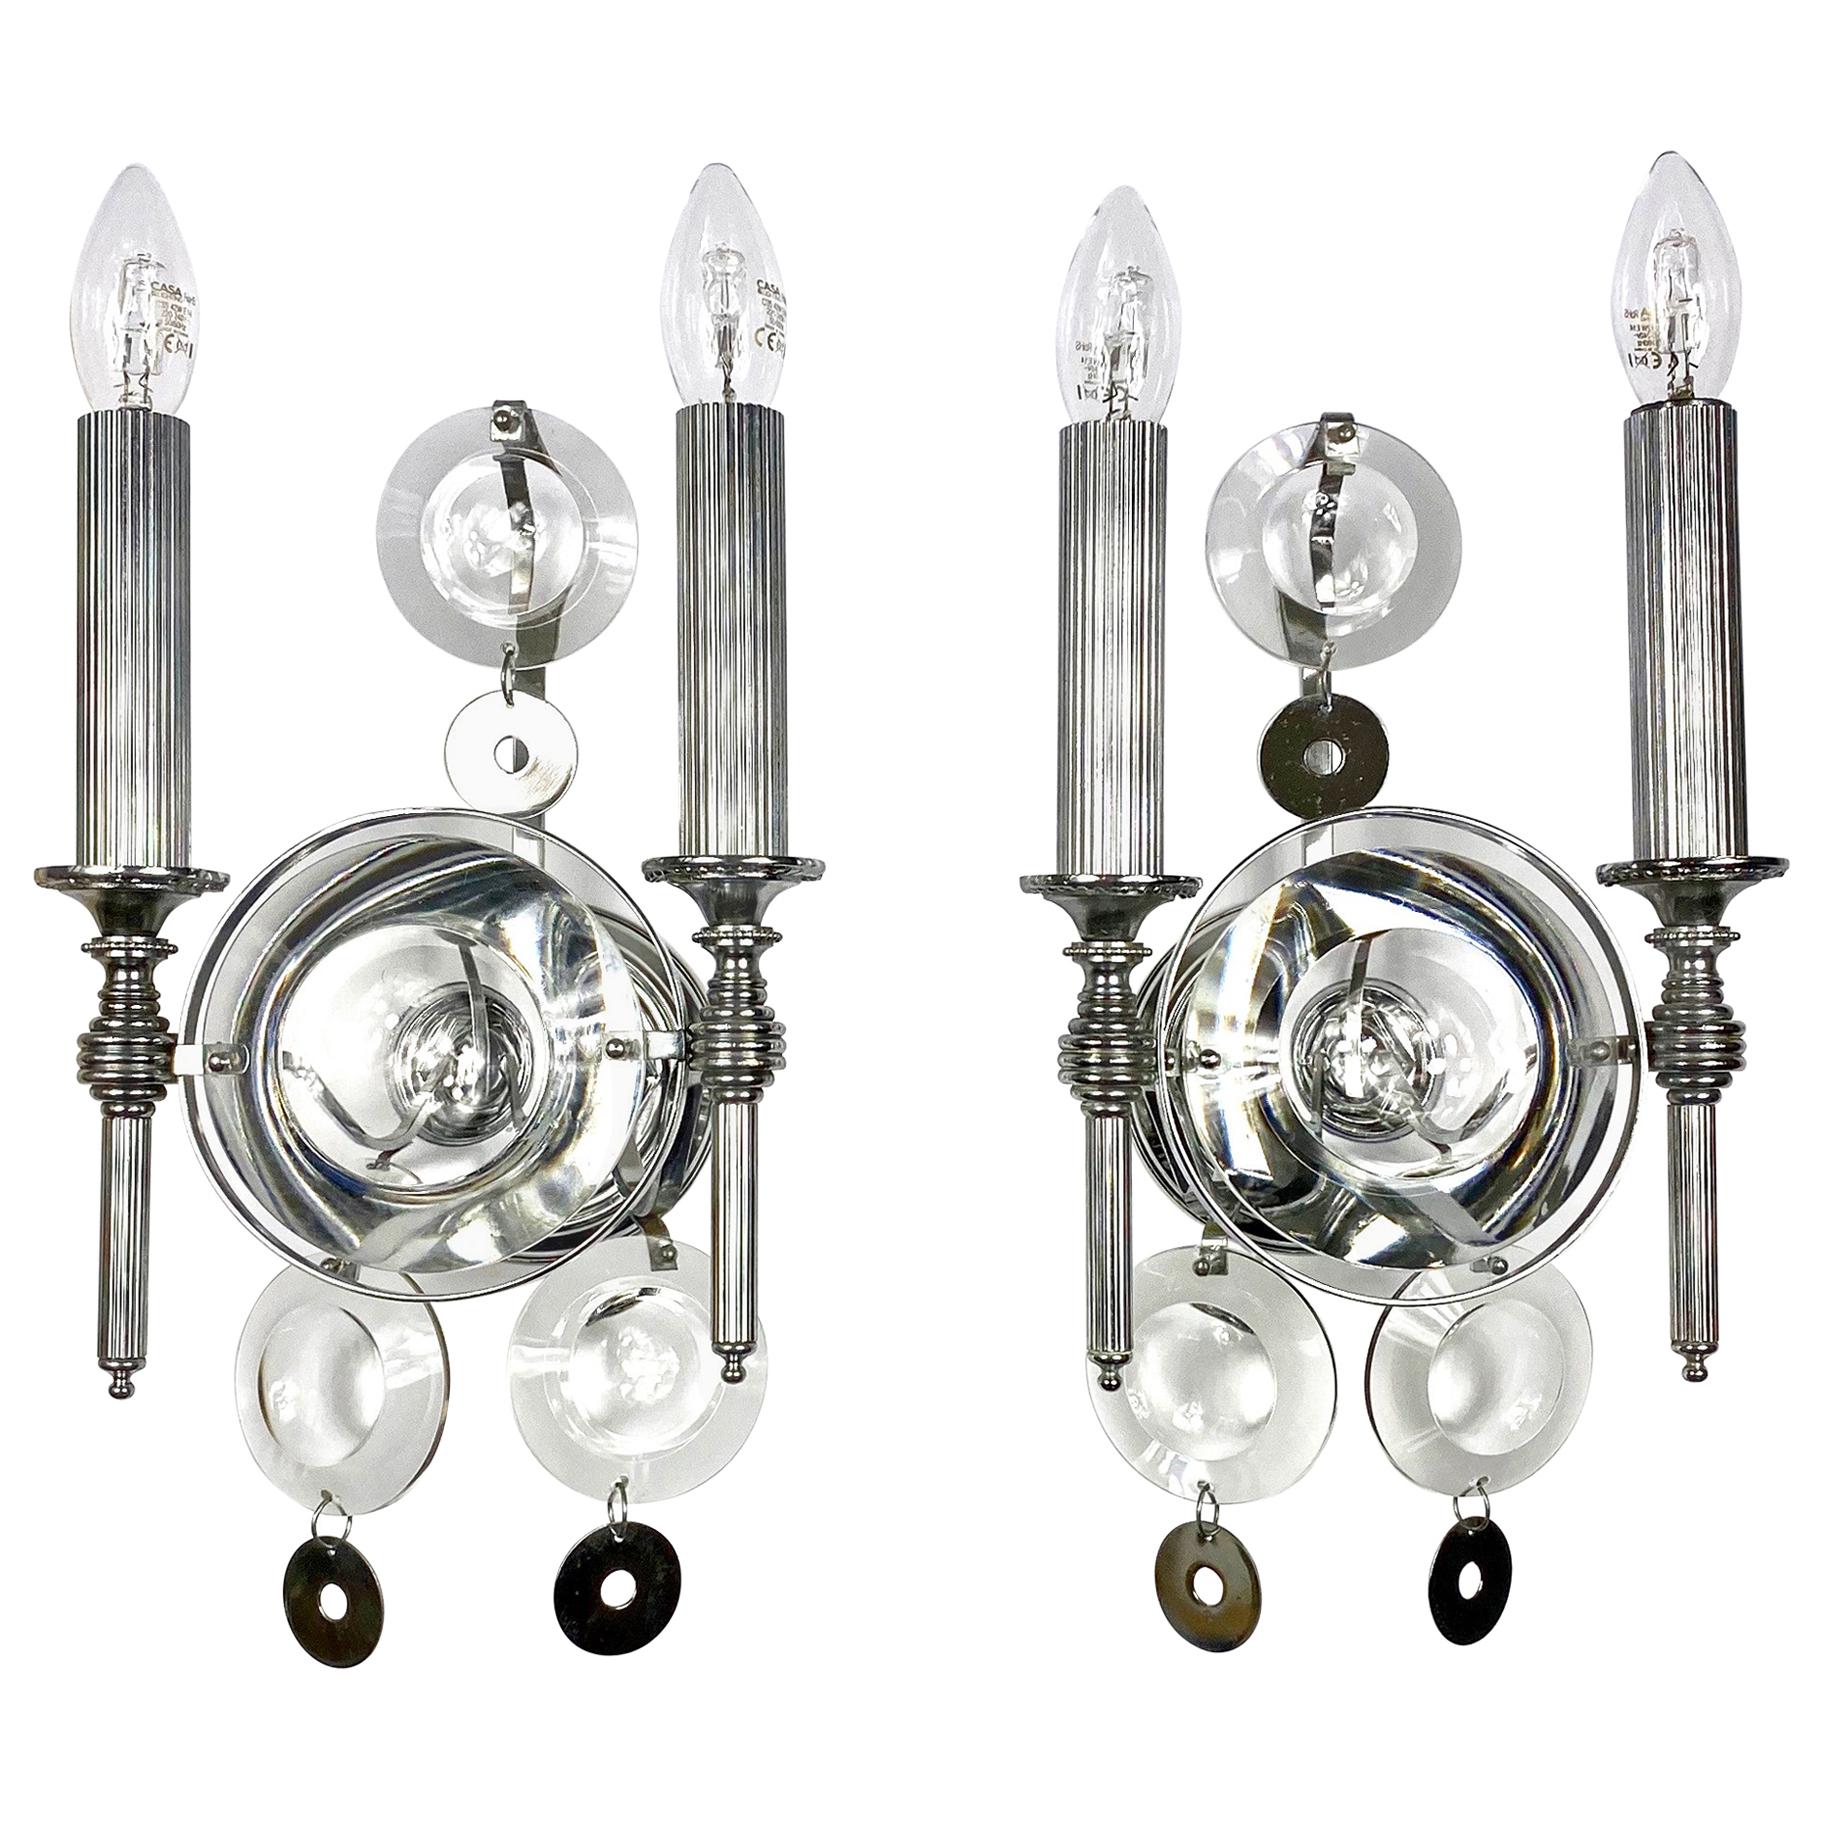 Pair of Sciolari Sconces Wall Lamp, Metal and Glass, Italy, 1970s